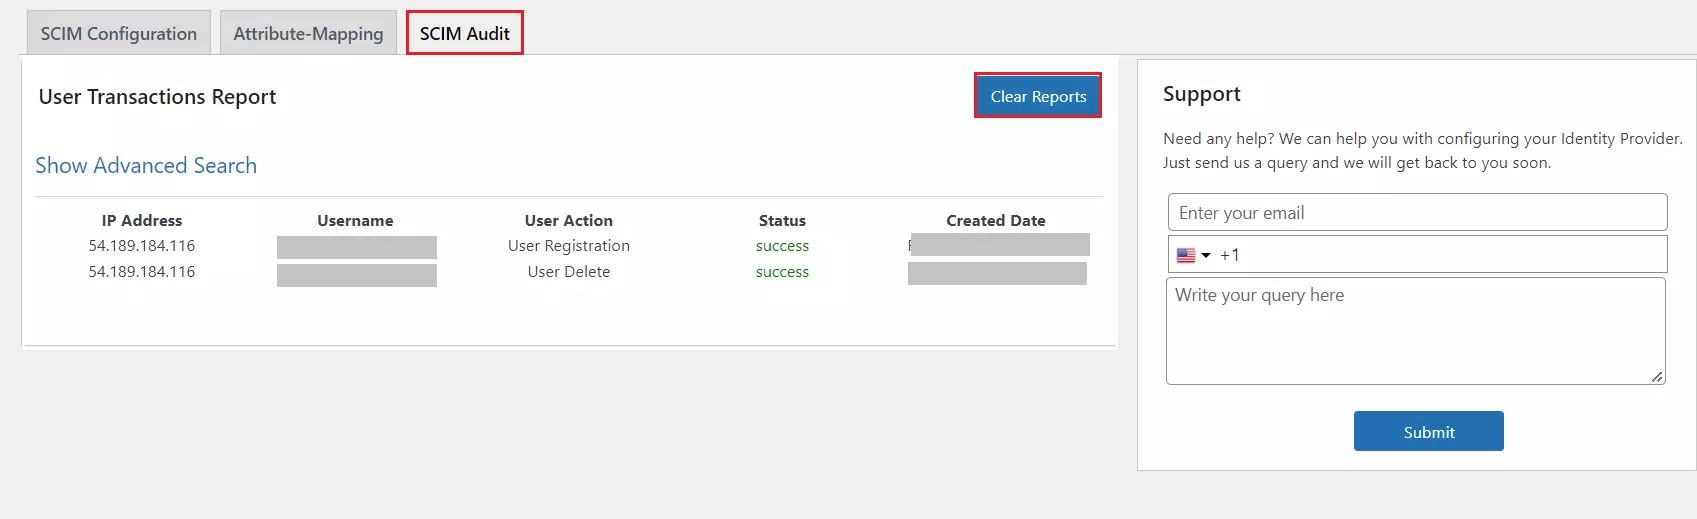 Scim User Provisioning - Clear Reports